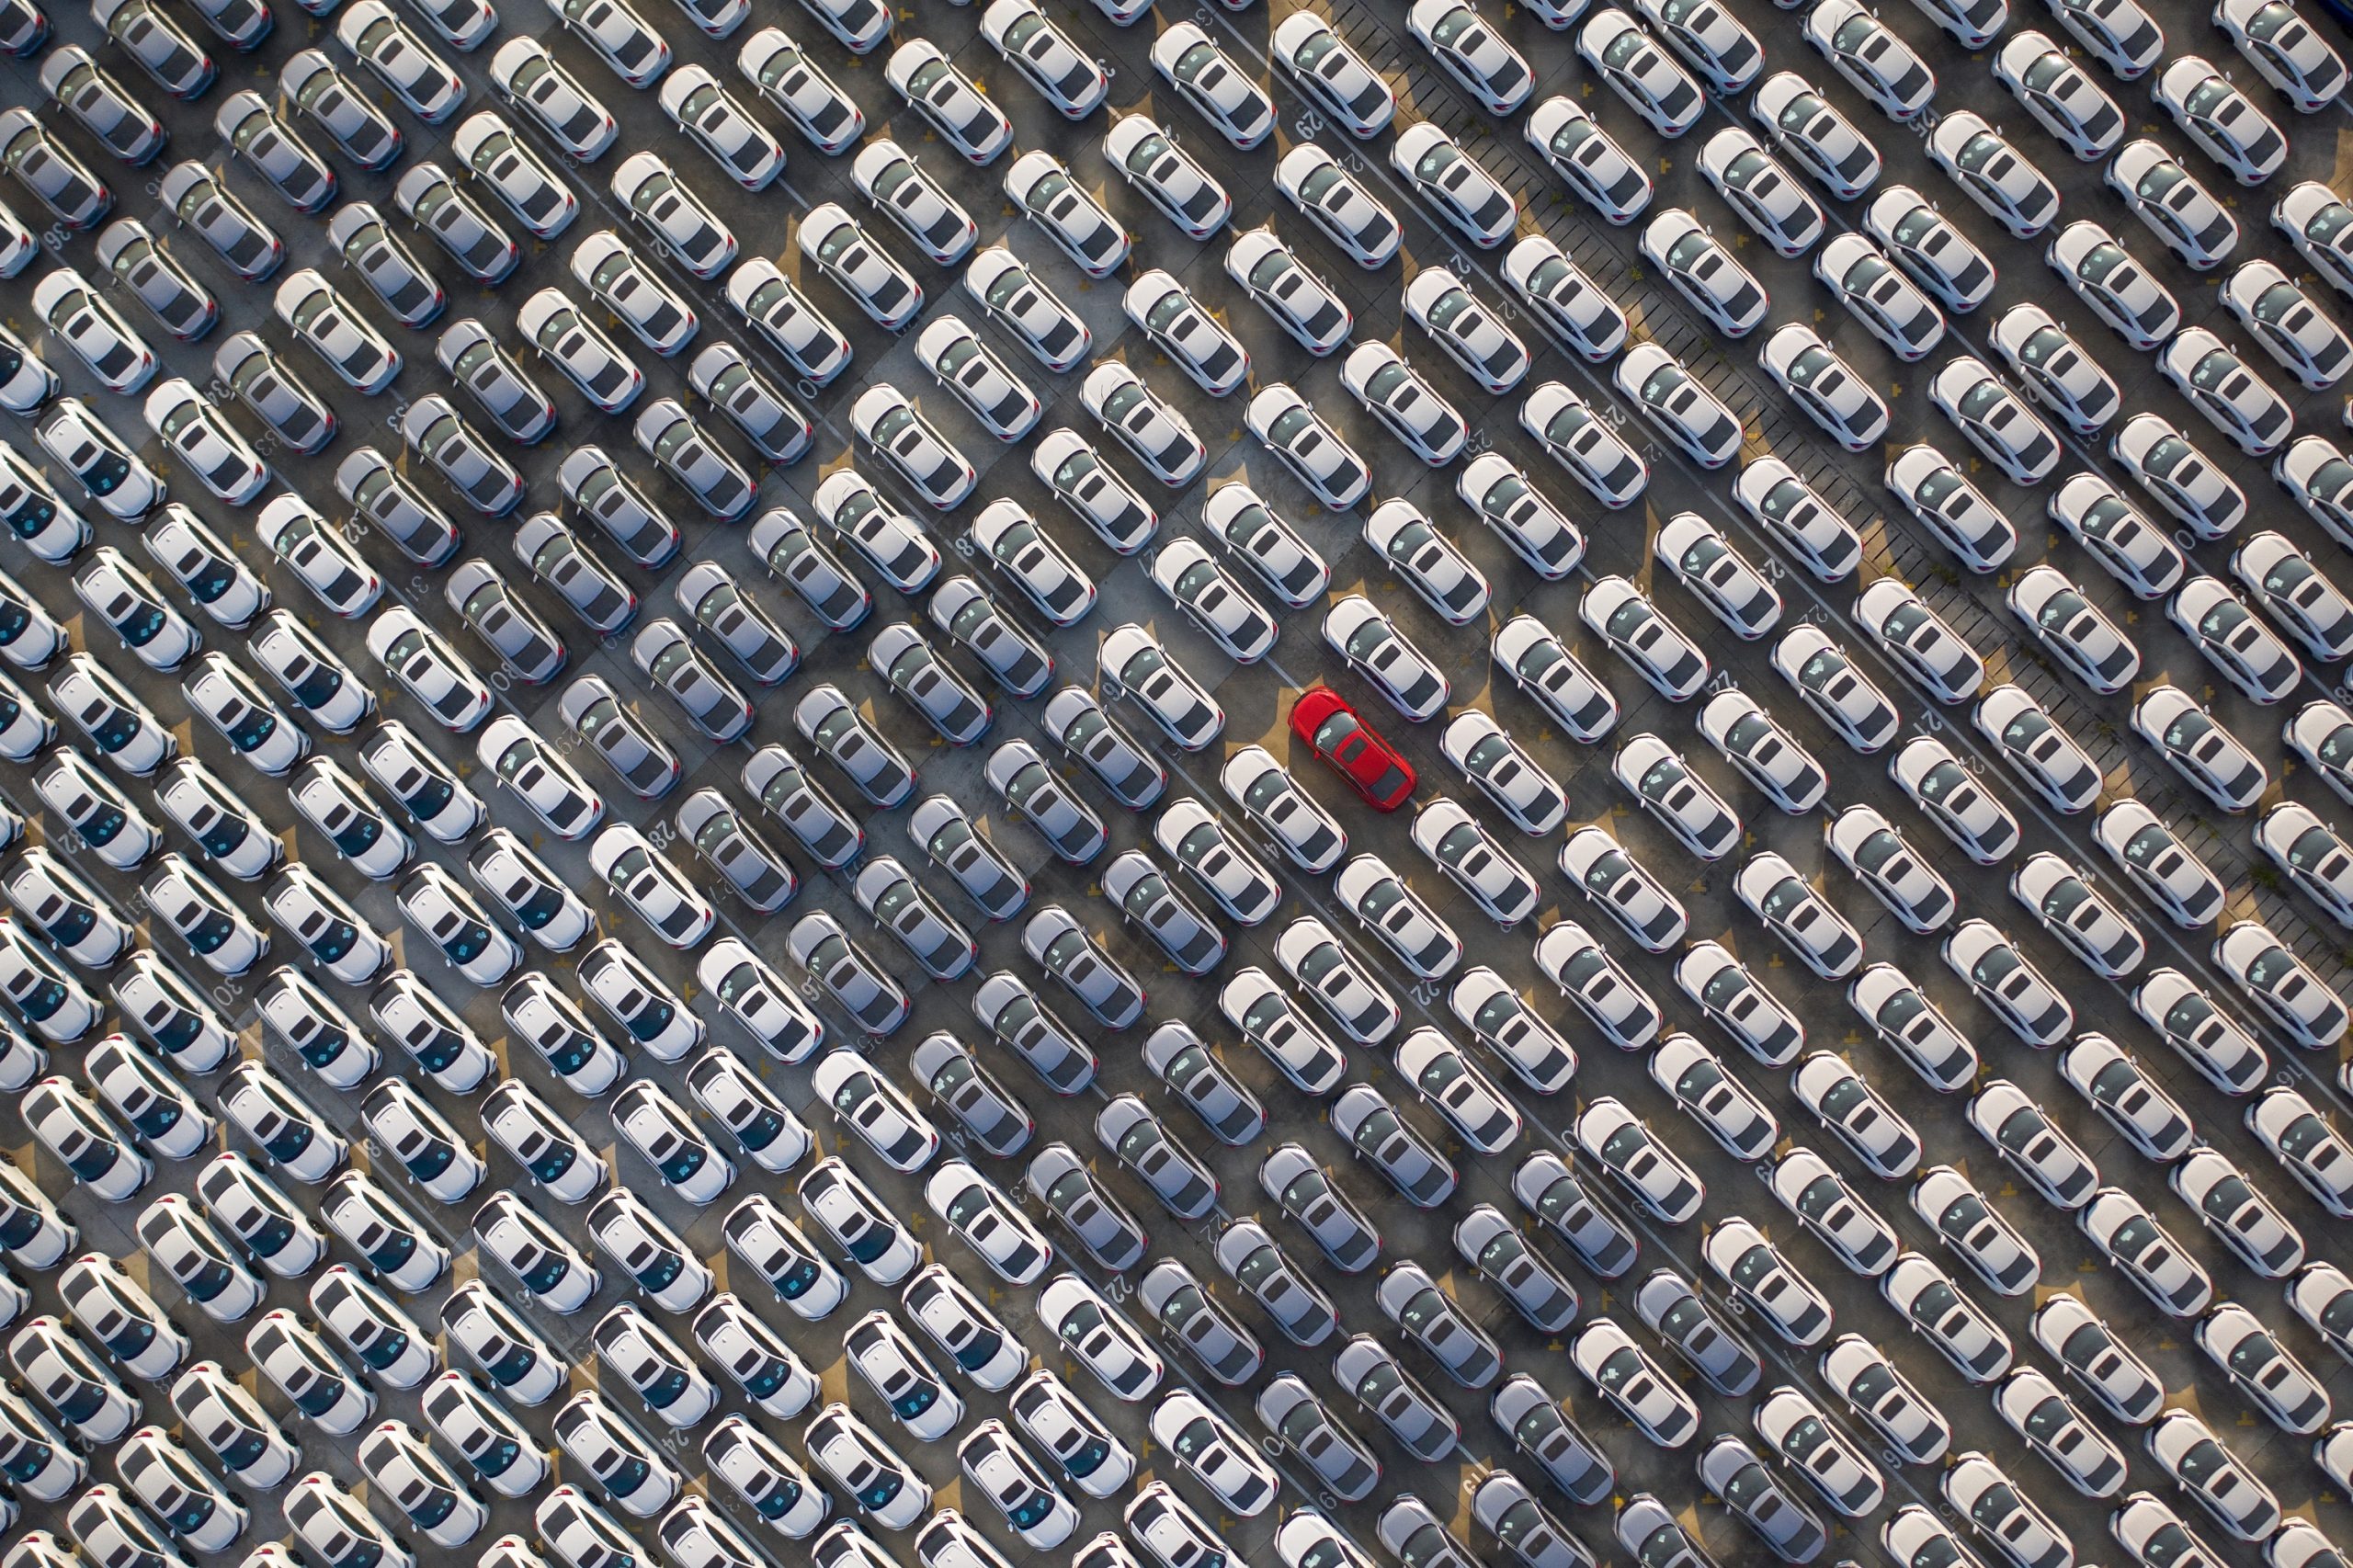 A full dealership car lot, a rare site given the recent rise in new car prices